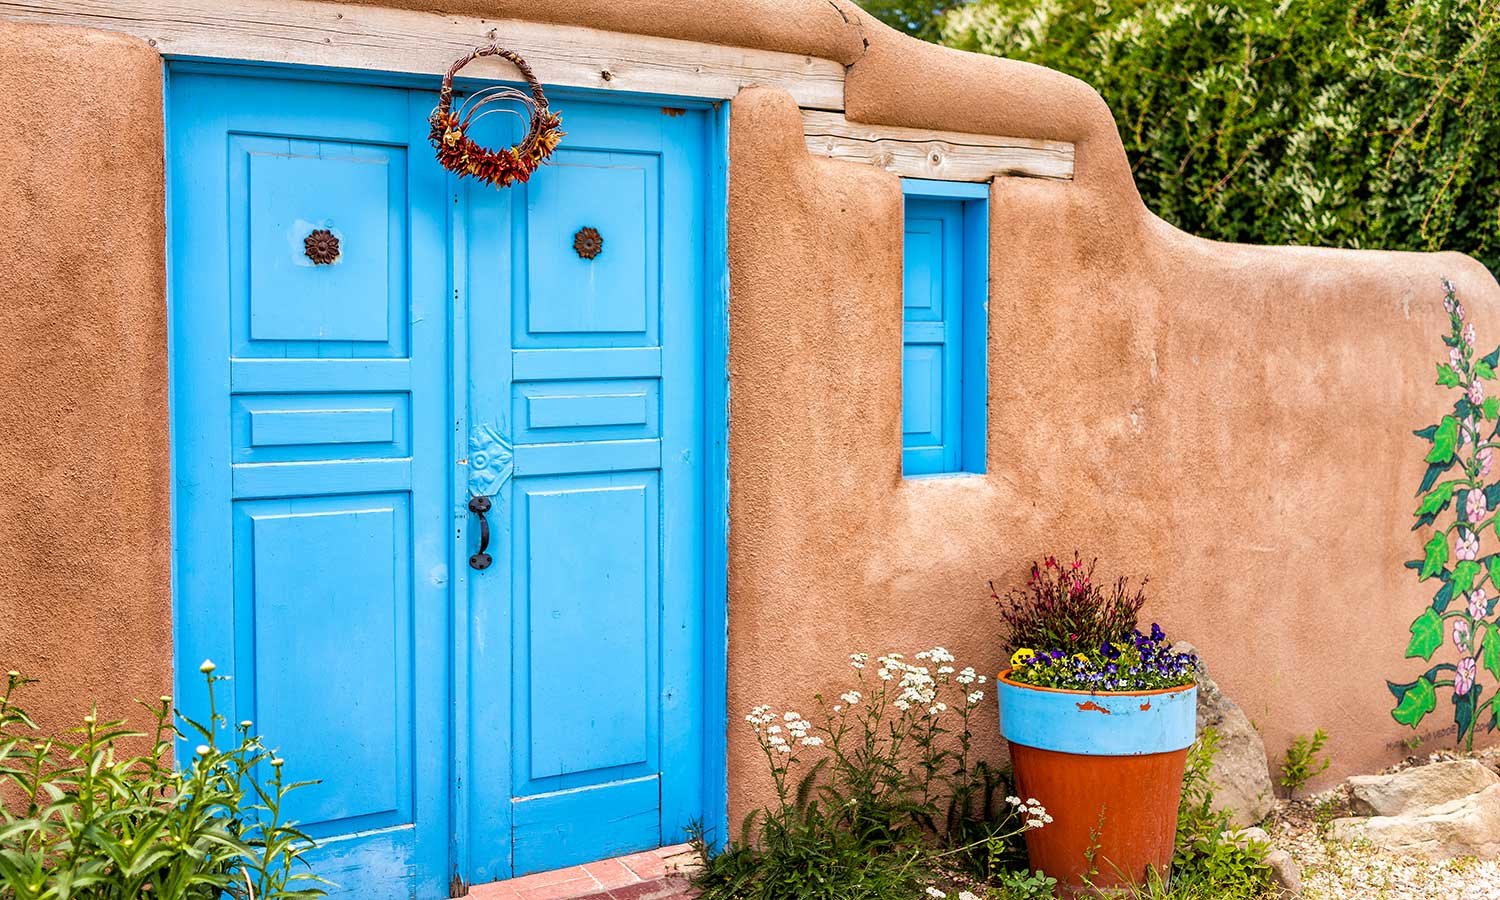 Do you love Santa Fe’s Blue Doors? Here’s Why They are Painted Blue